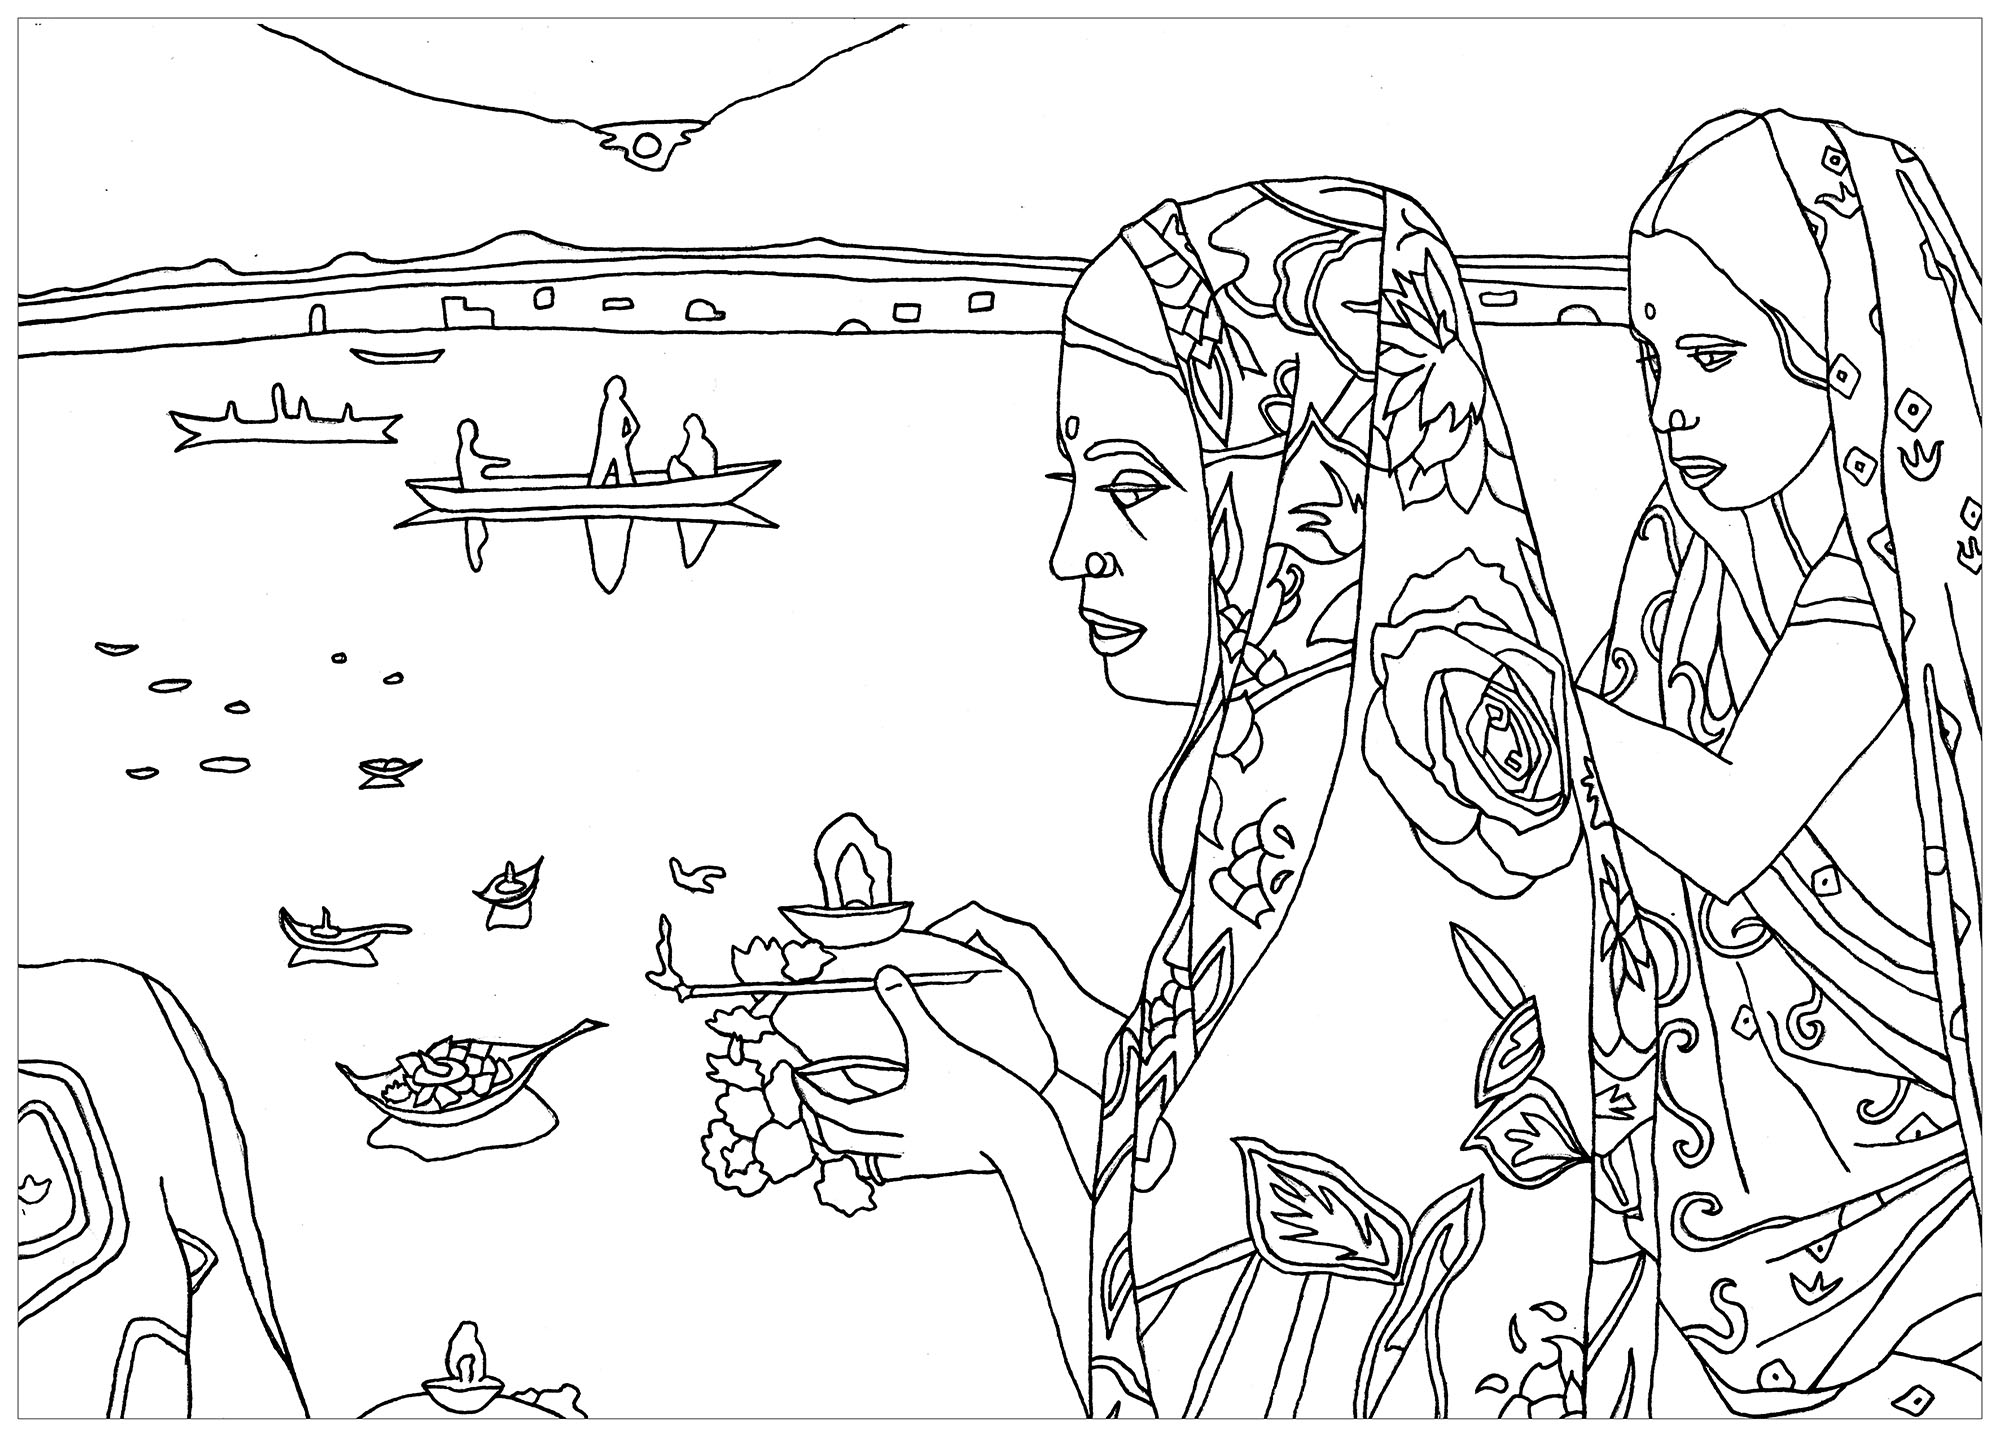 Coloring page inspired by the Puja : Hindu religious rite